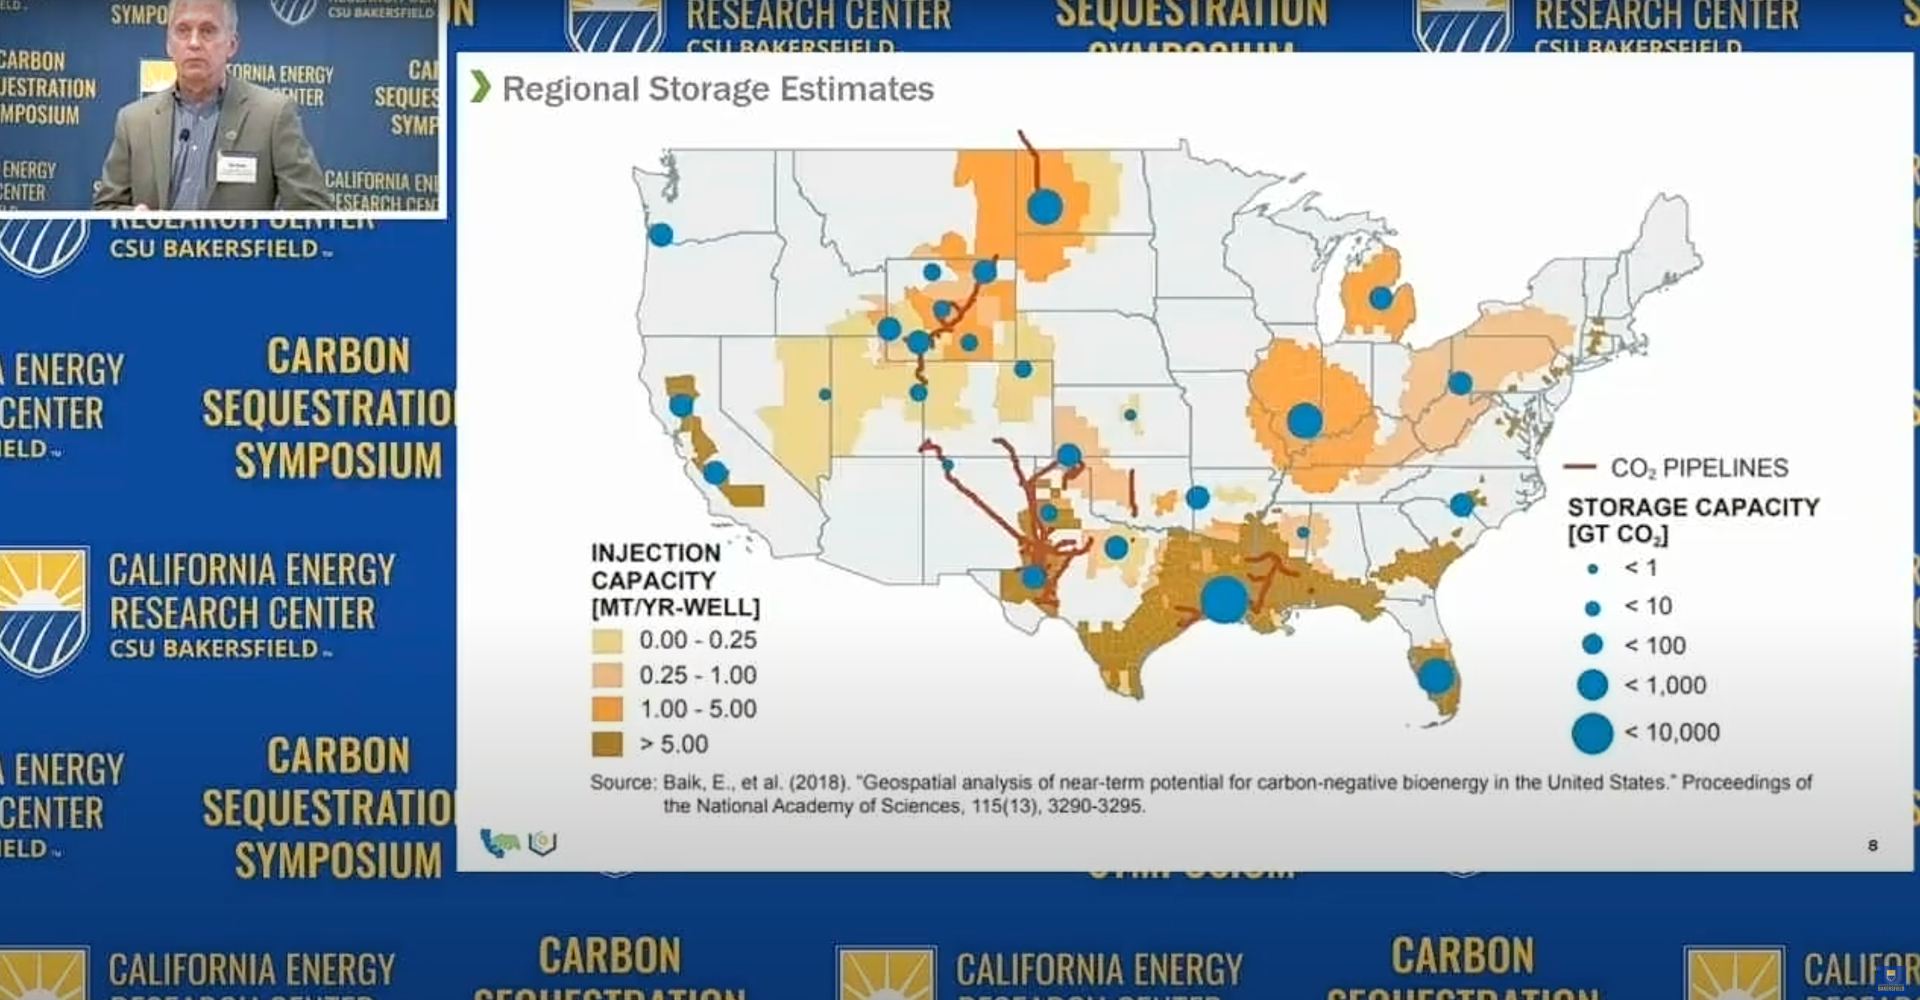 Ken Haney talks on CCS in California and the San Joaquin Valley